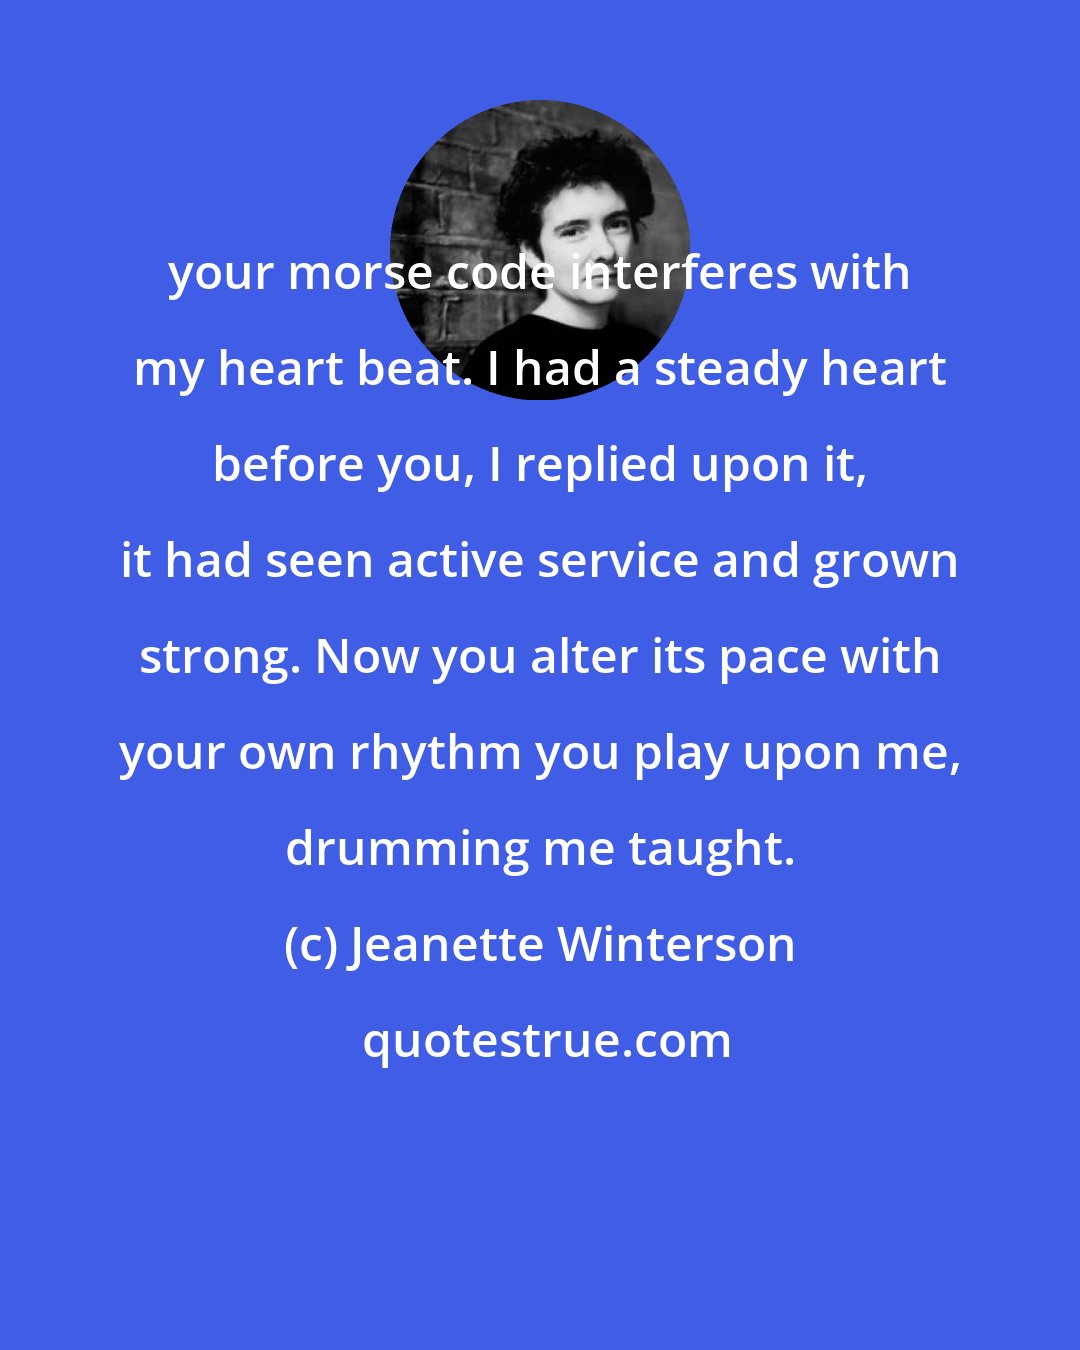 Jeanette Winterson: your morse code interferes with my heart beat. I had a steady heart before you, I replied upon it, it had seen active service and grown strong. Now you alter its pace with your own rhythm you play upon me, drumming me taught.